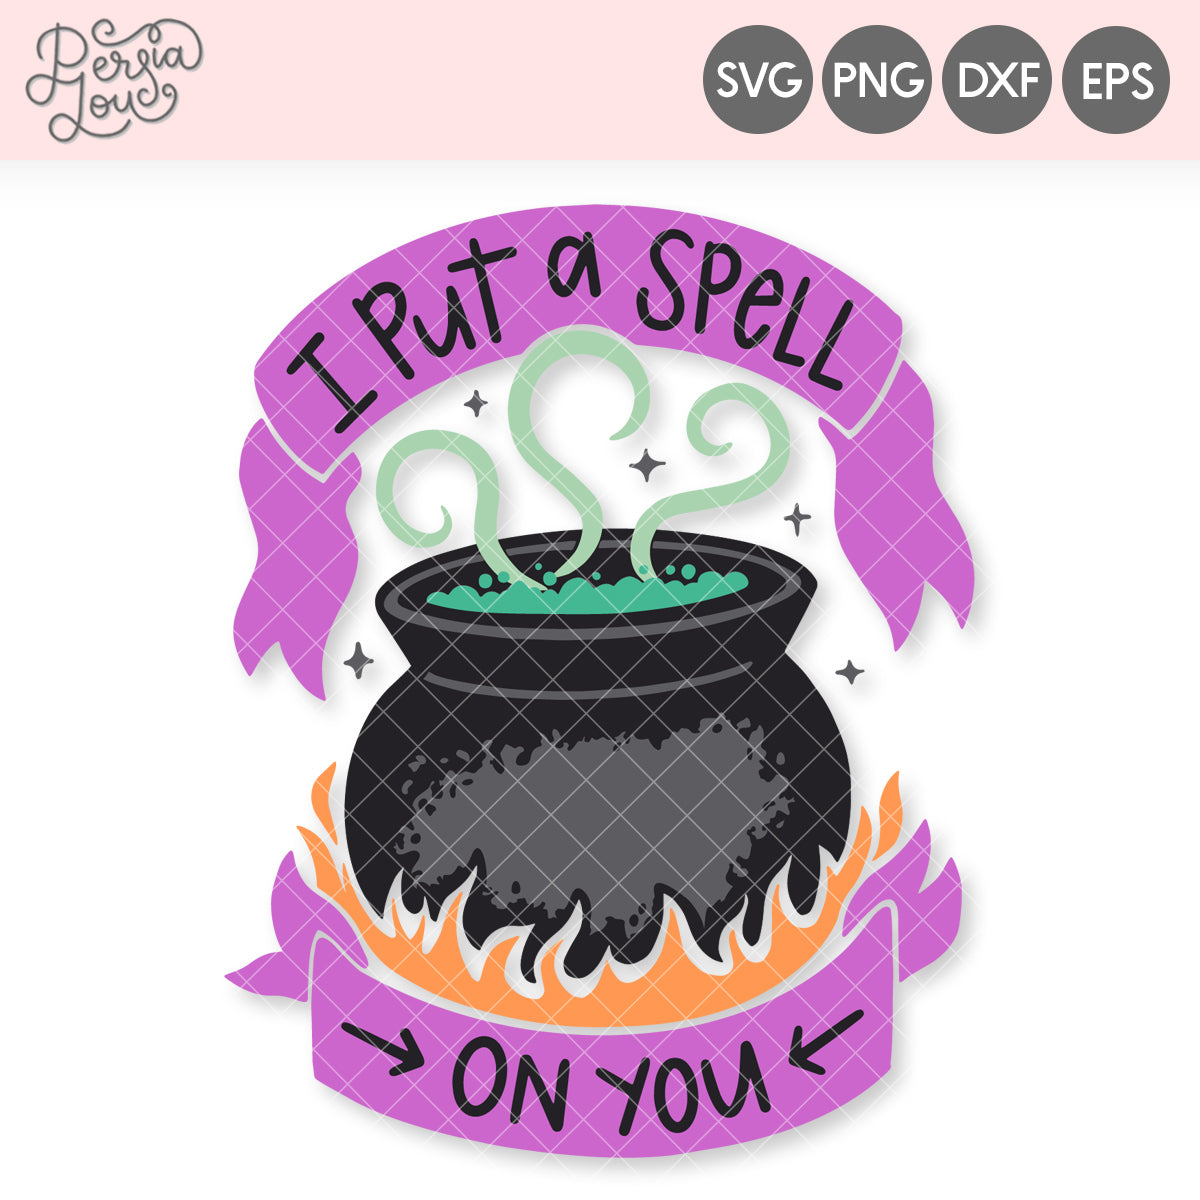 I Put a Spell on You SVG